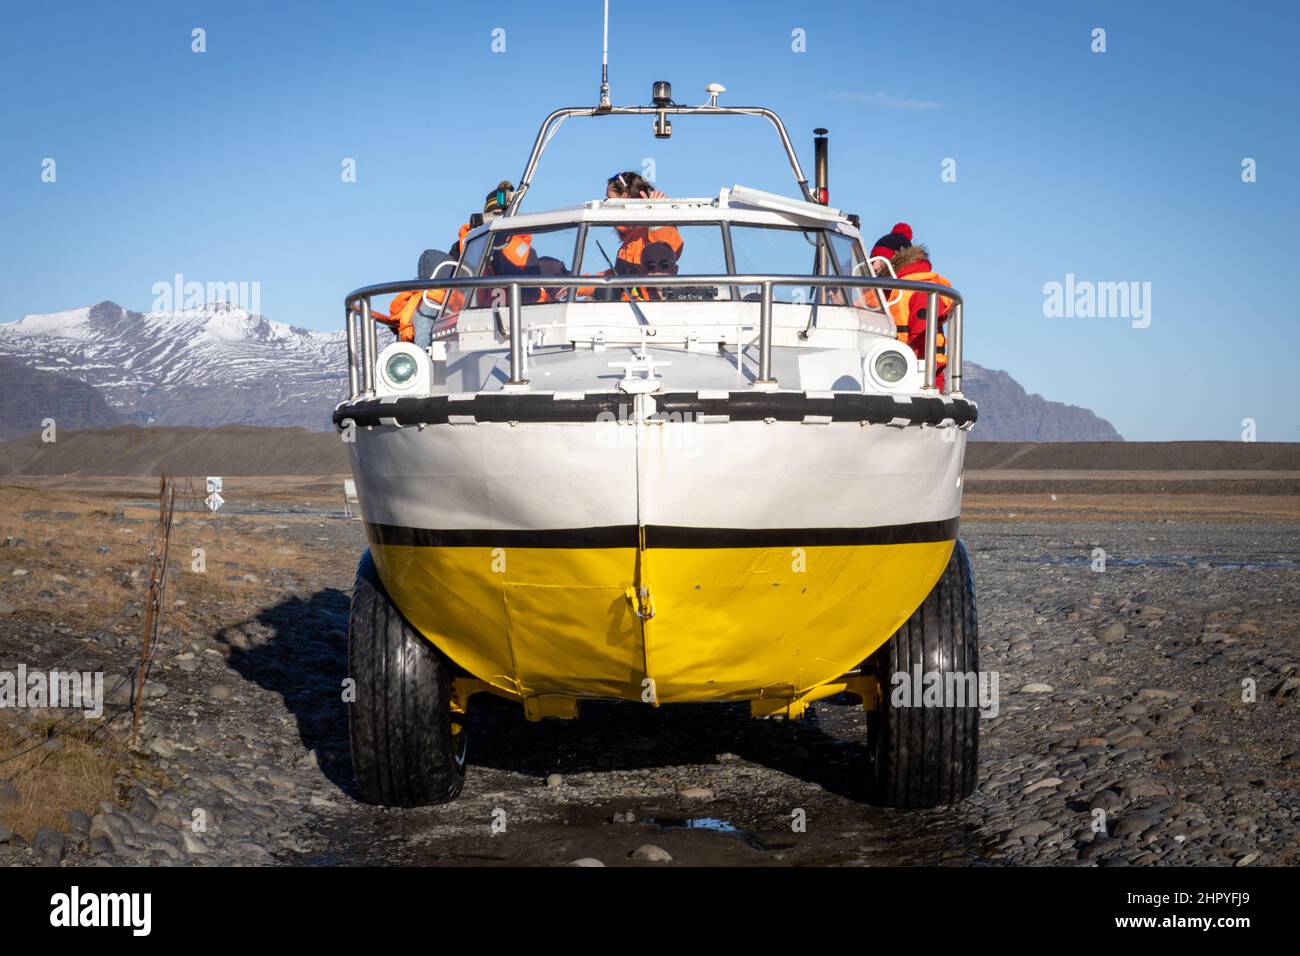 Picture of the boat used in the tour among the icebergs coming from the Skaftafellsjokul glacier in the Jokulsarlon lagoon in Iceland Stock Photo